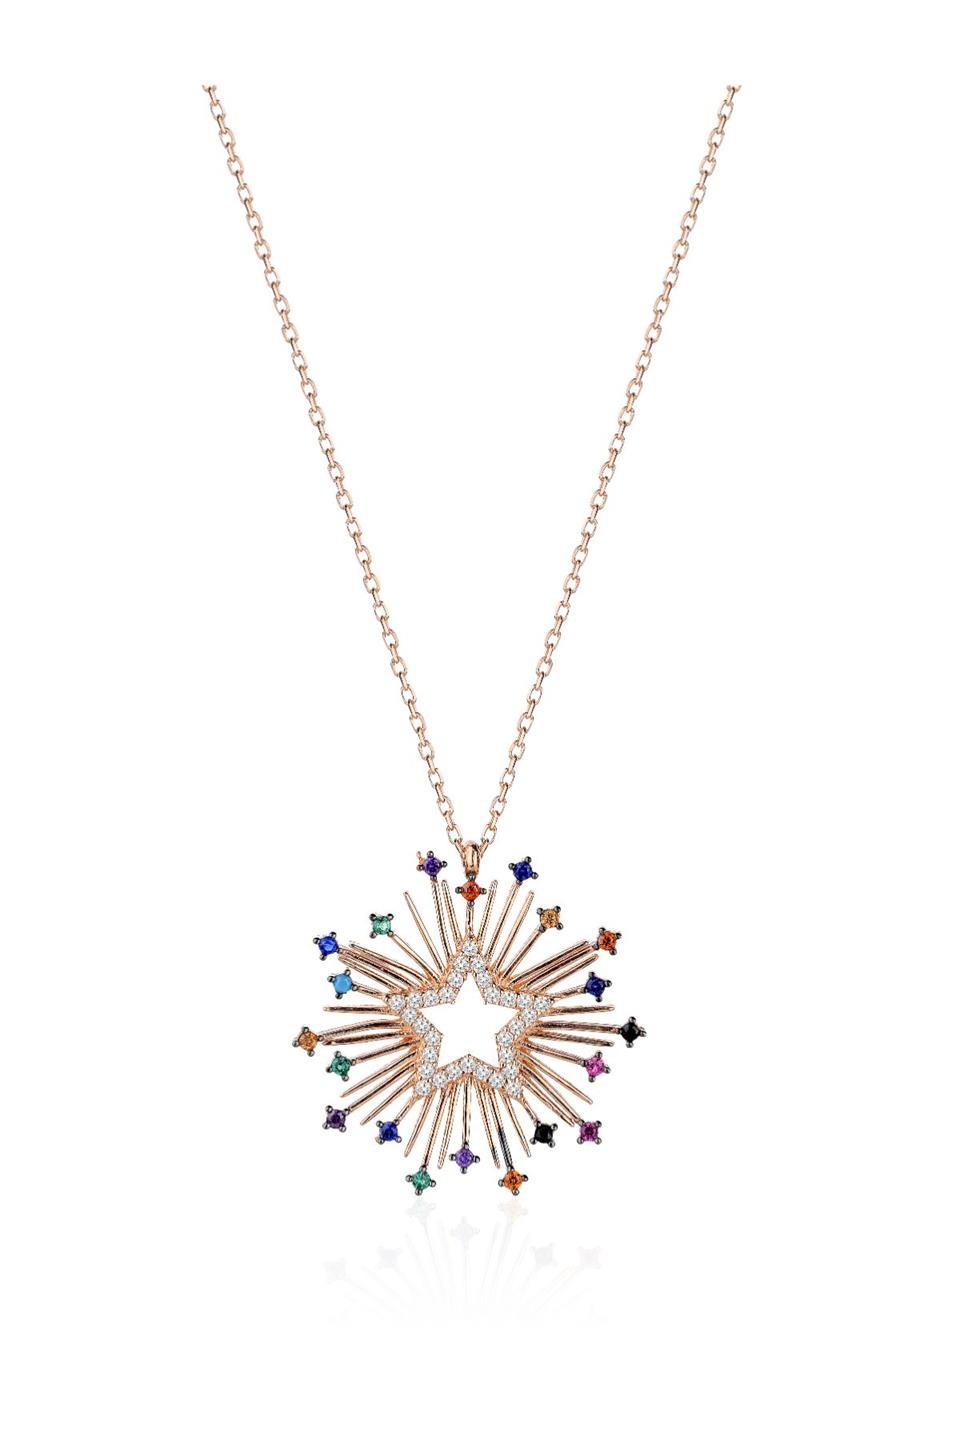 Astrology star necklace